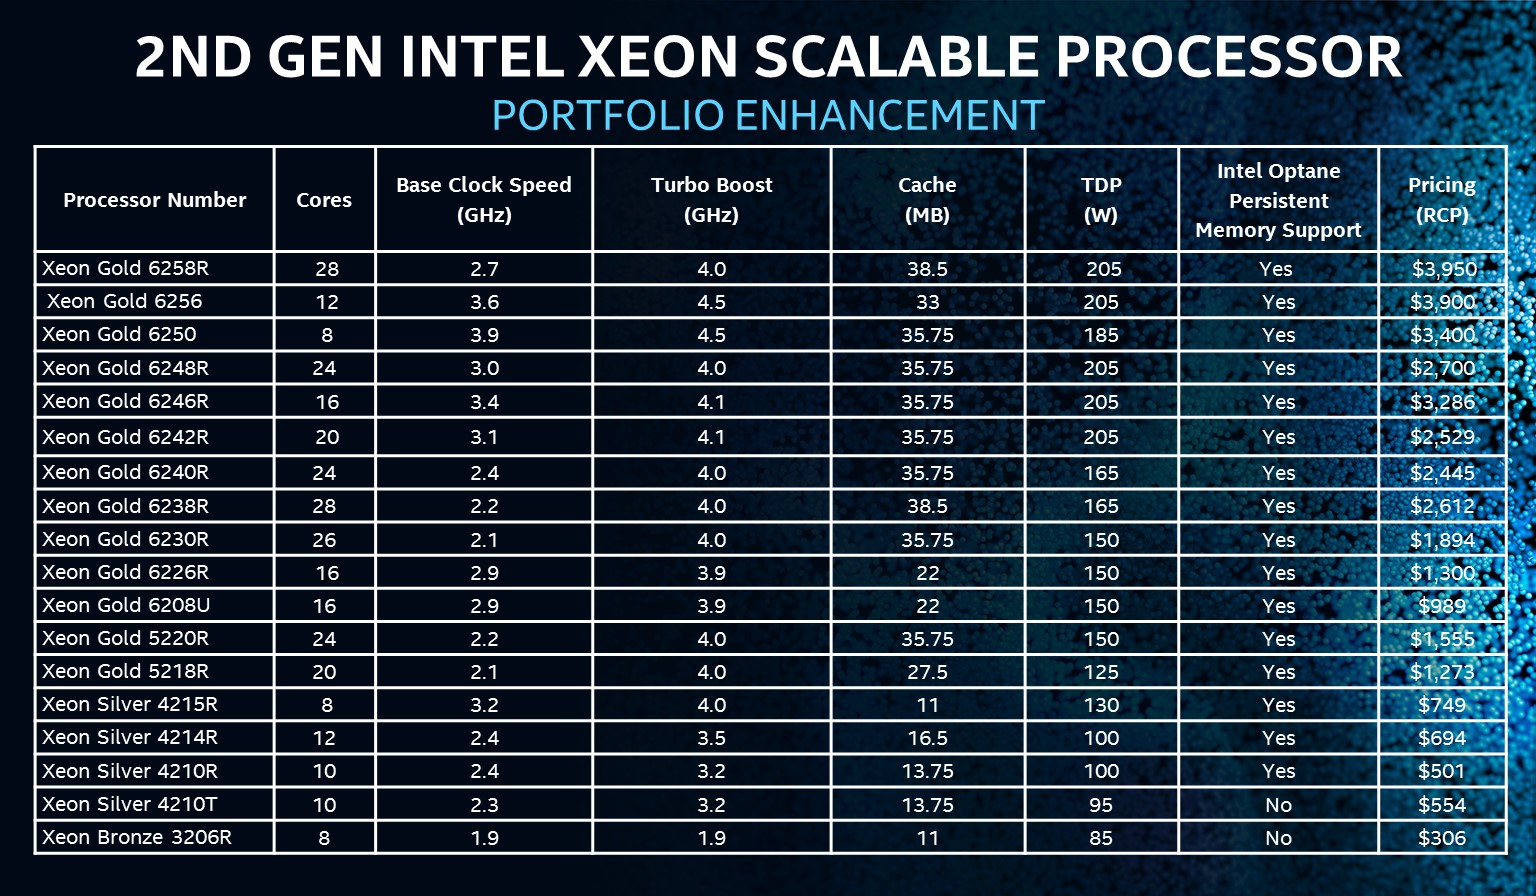 kyst cylinder visdom Intel Releases New 2nd Gen Intel Xeon Scalable CPUs - StorageReview.com